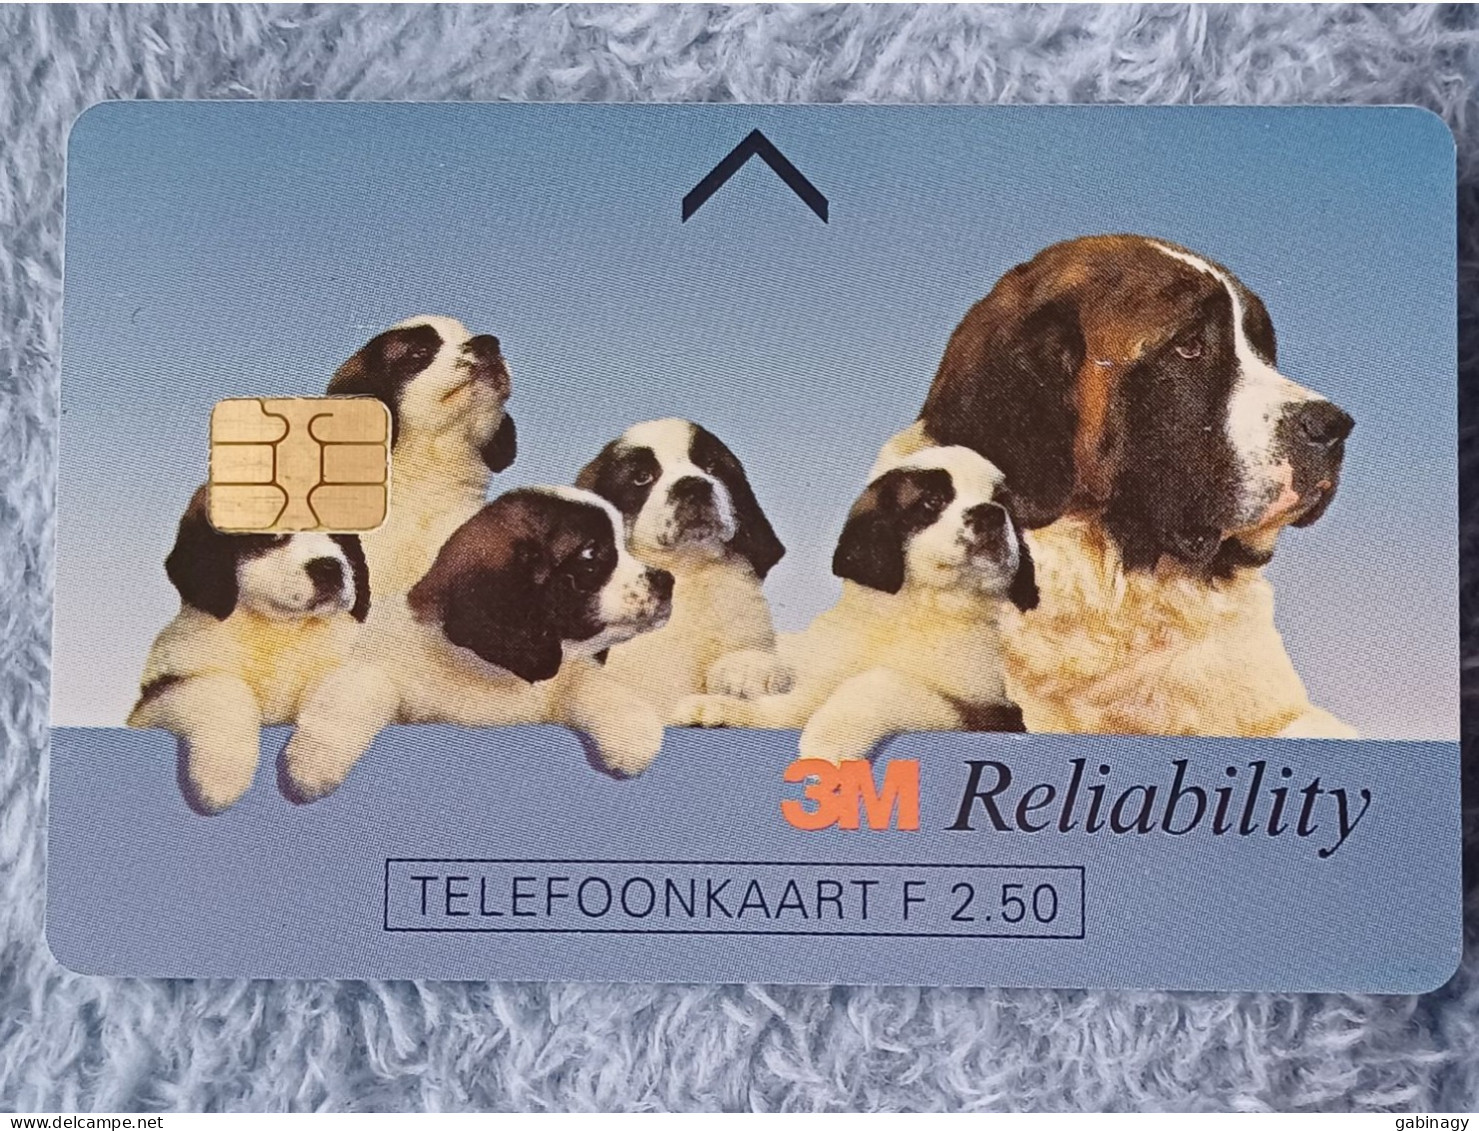 NETHERLANDS - CRD130-2A - 3M Reliability  - DOGS - Private